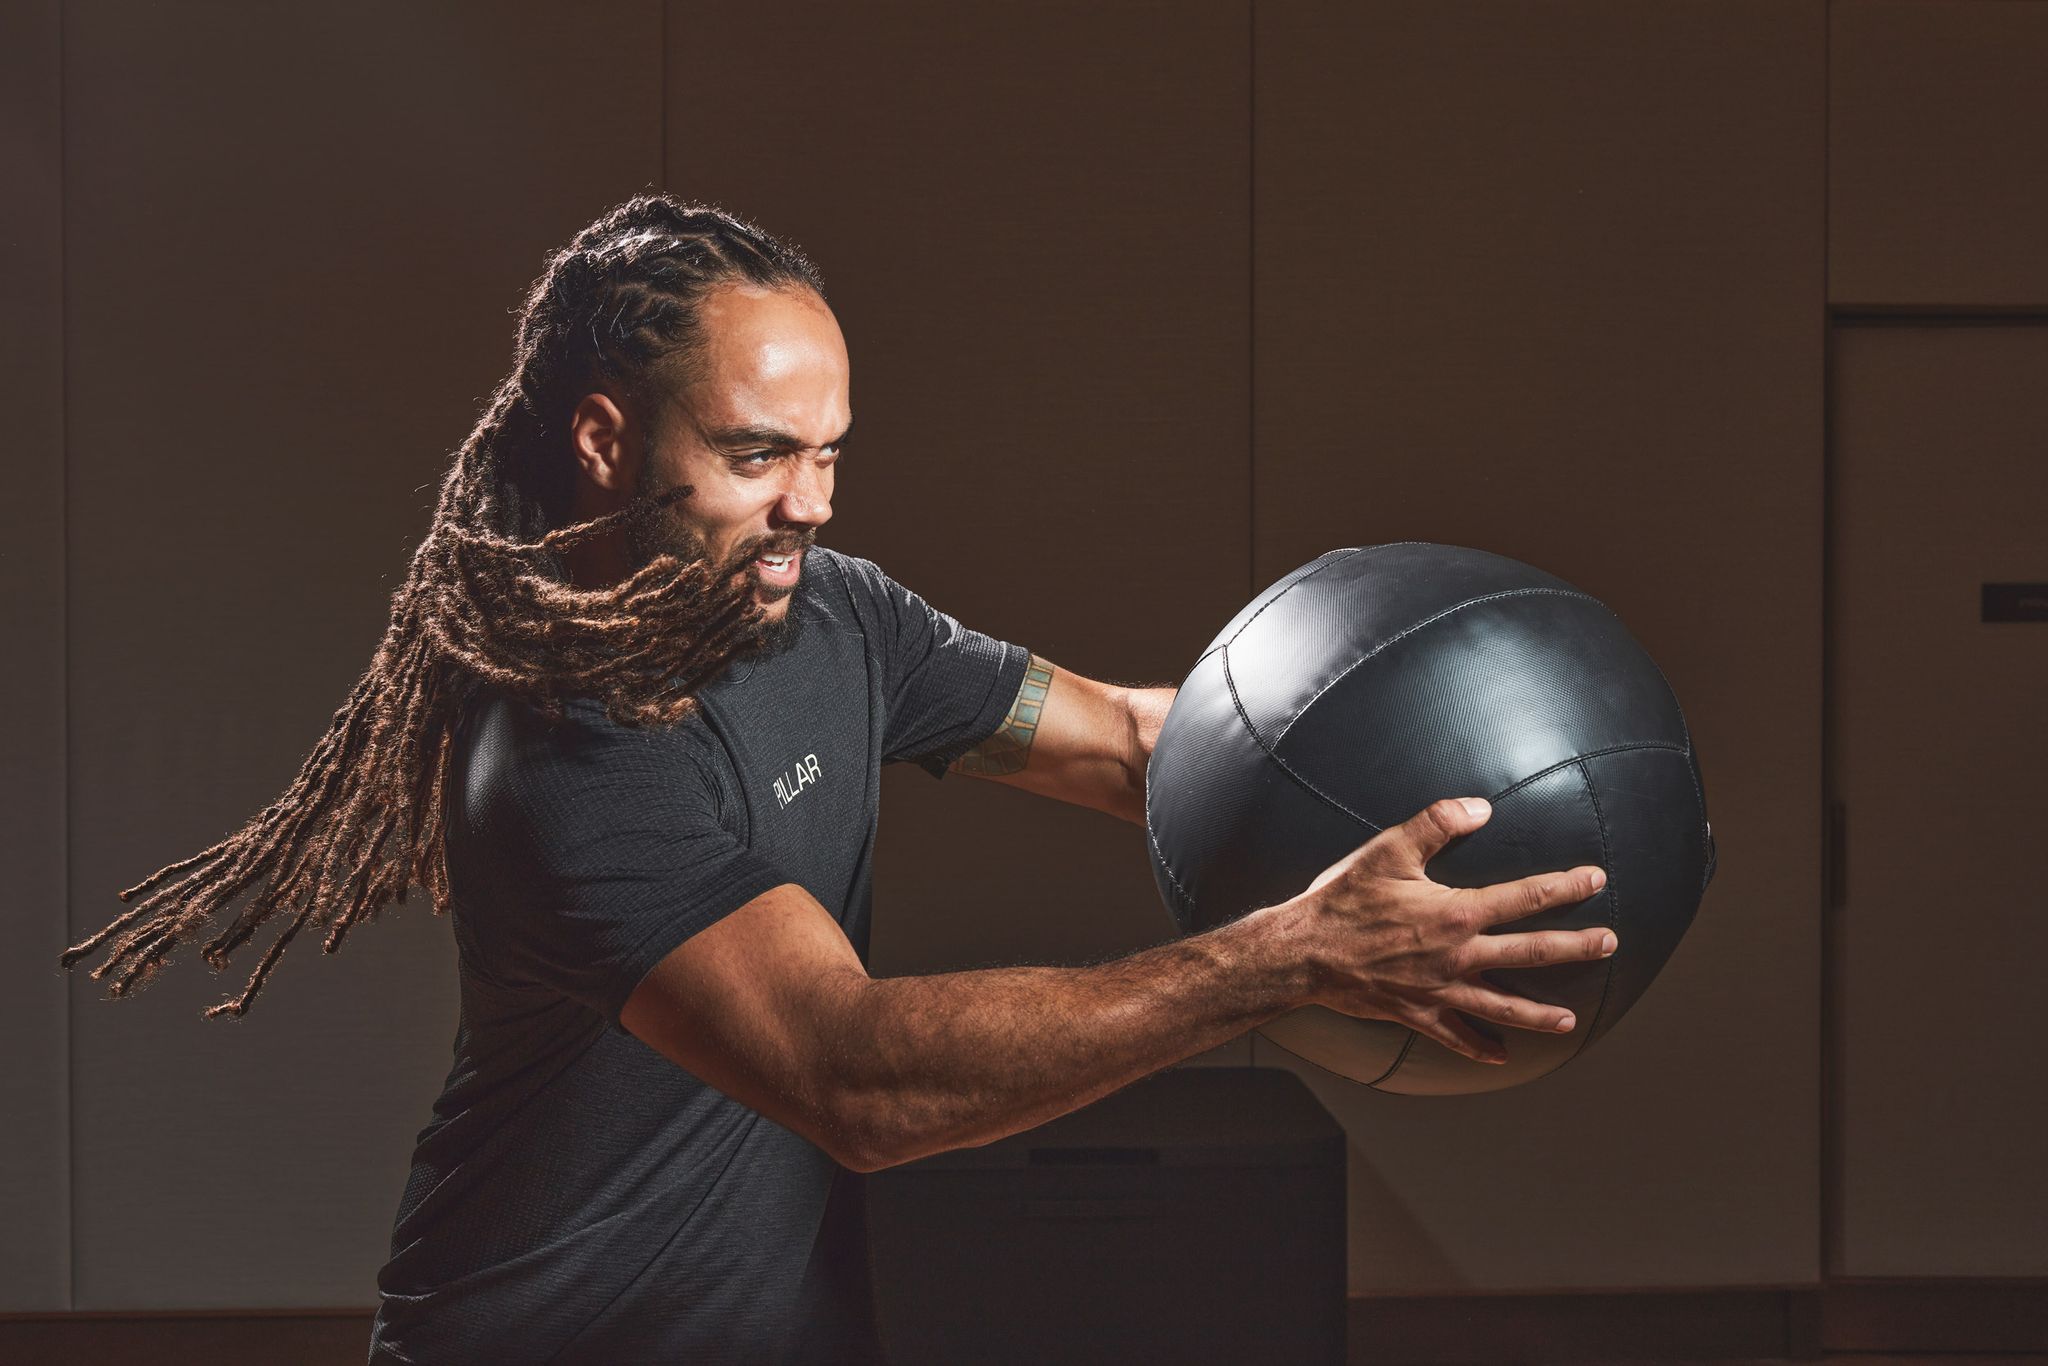 a man with long hair holding a ball